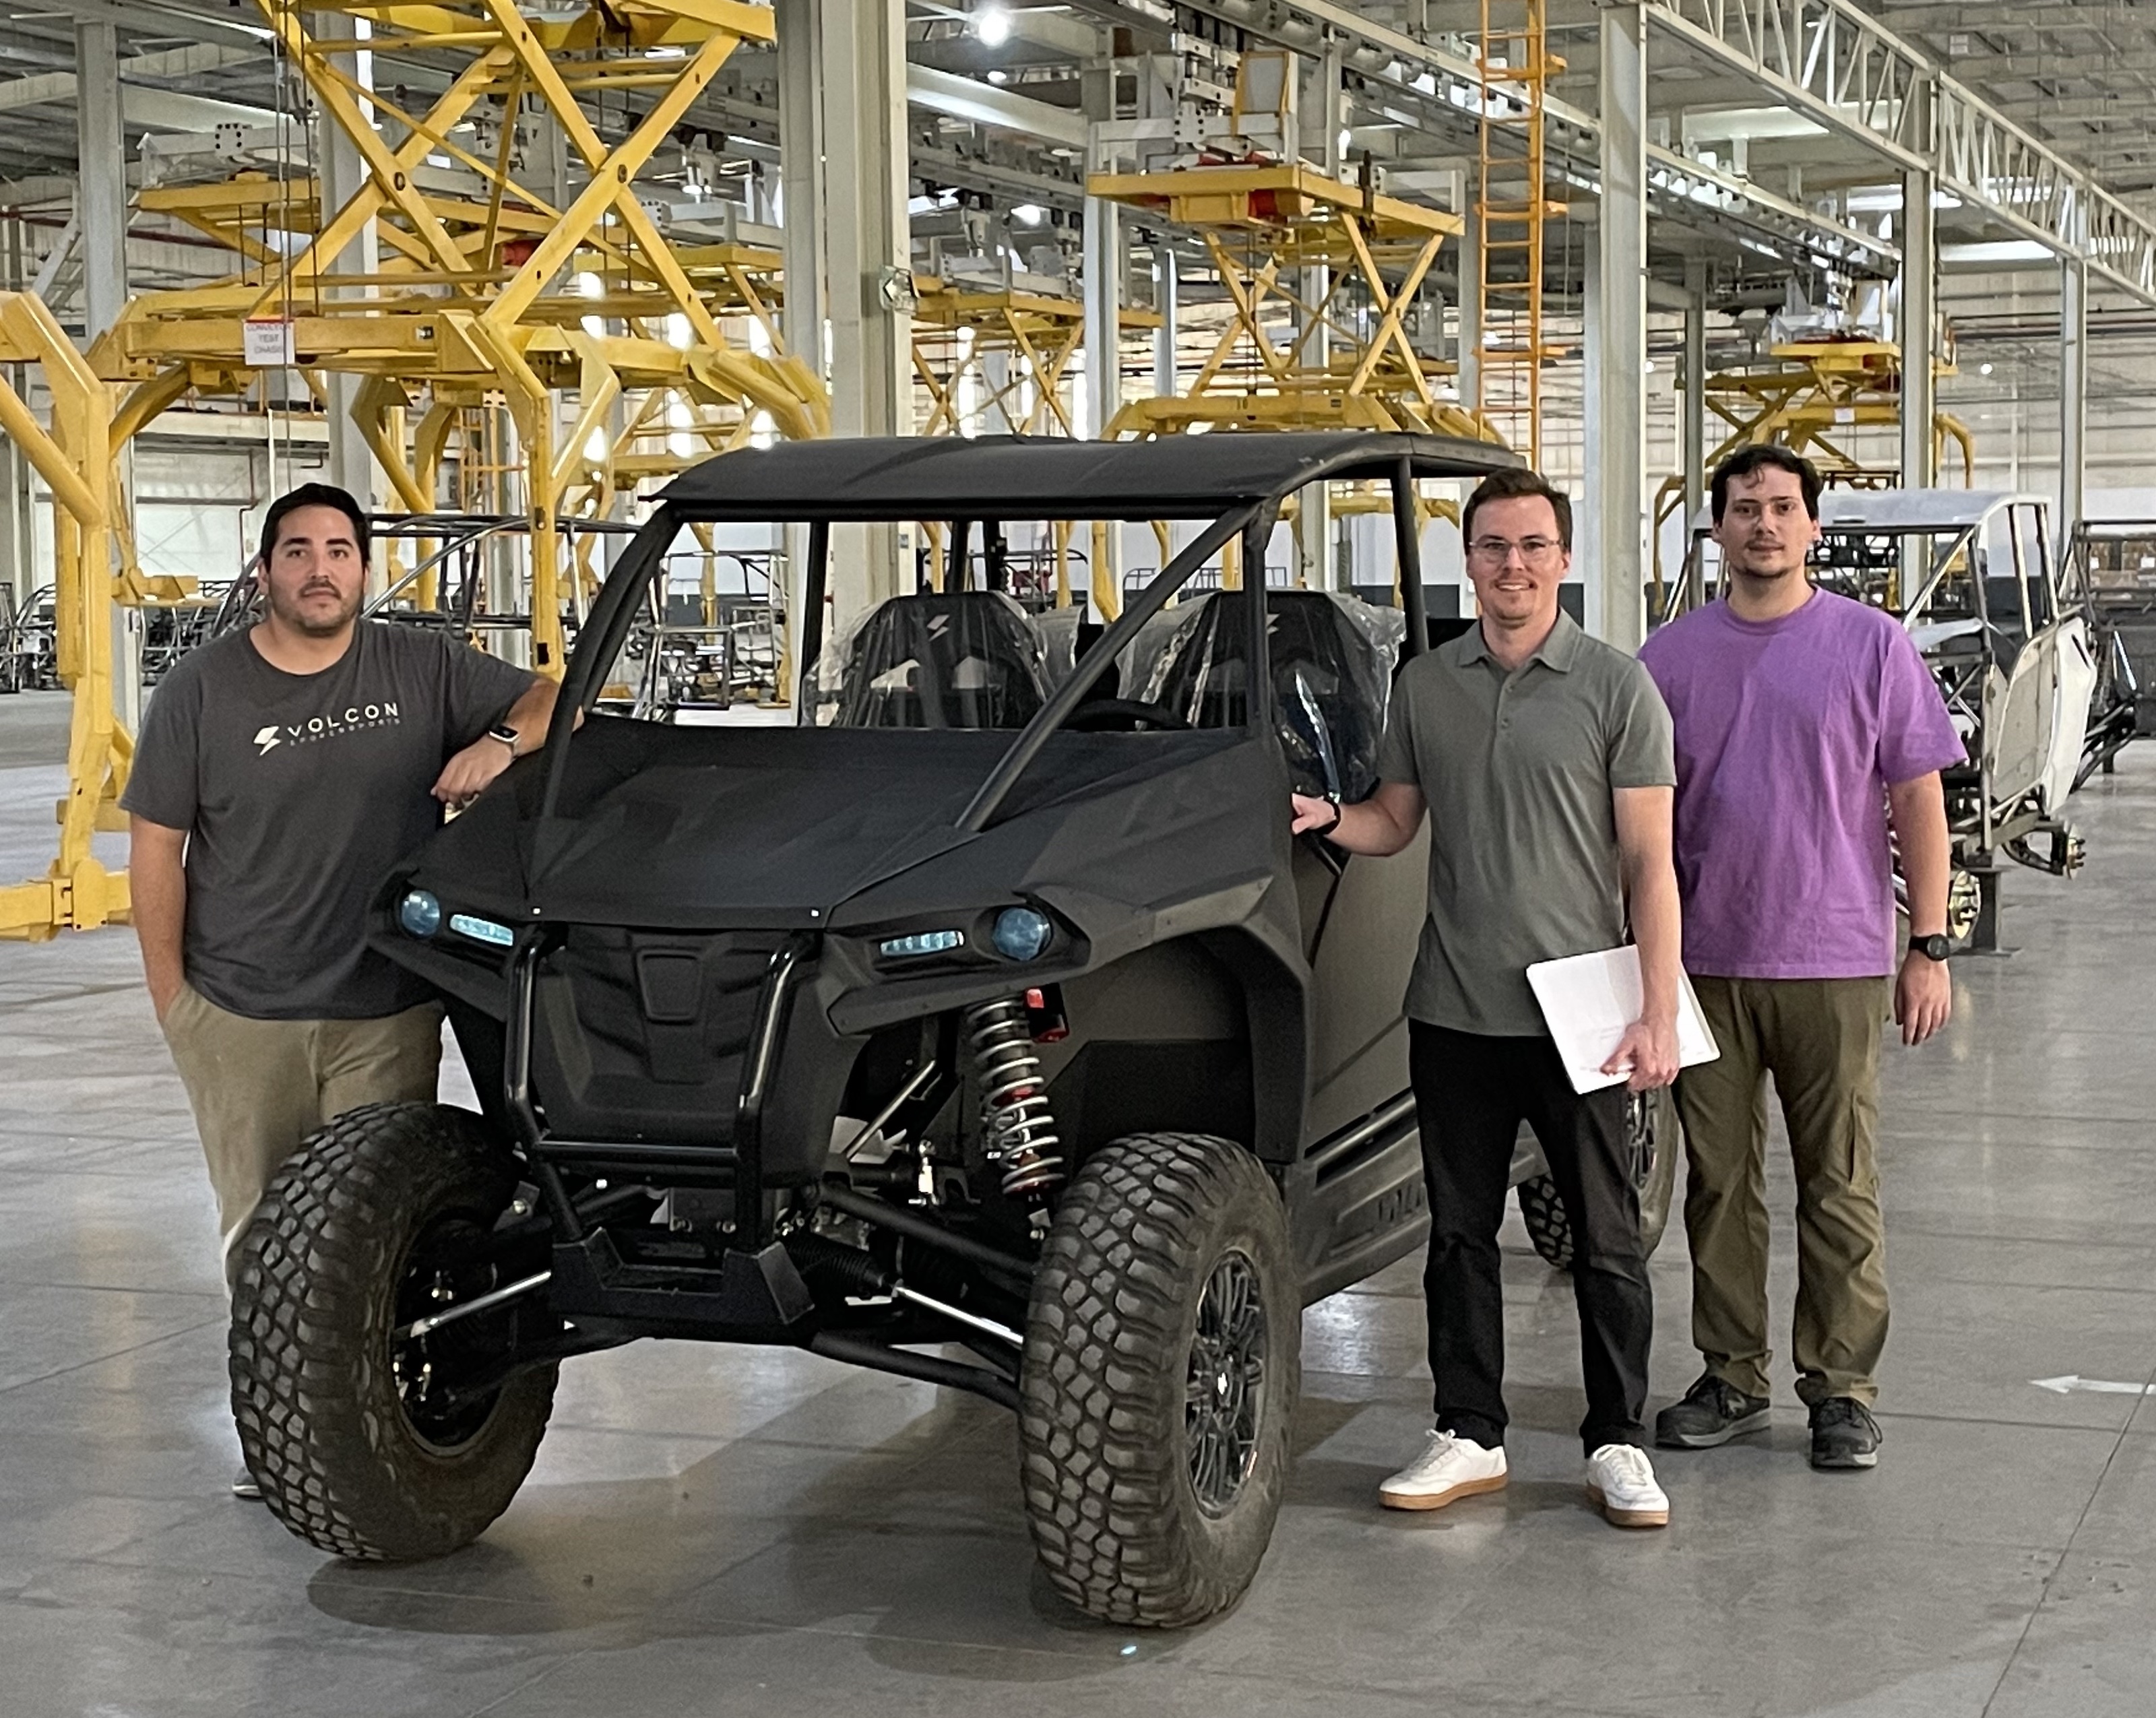 Volcon ePowersports Announces It Has Entered Into Initial Low Volume Production of Its Flagship STAG UTV